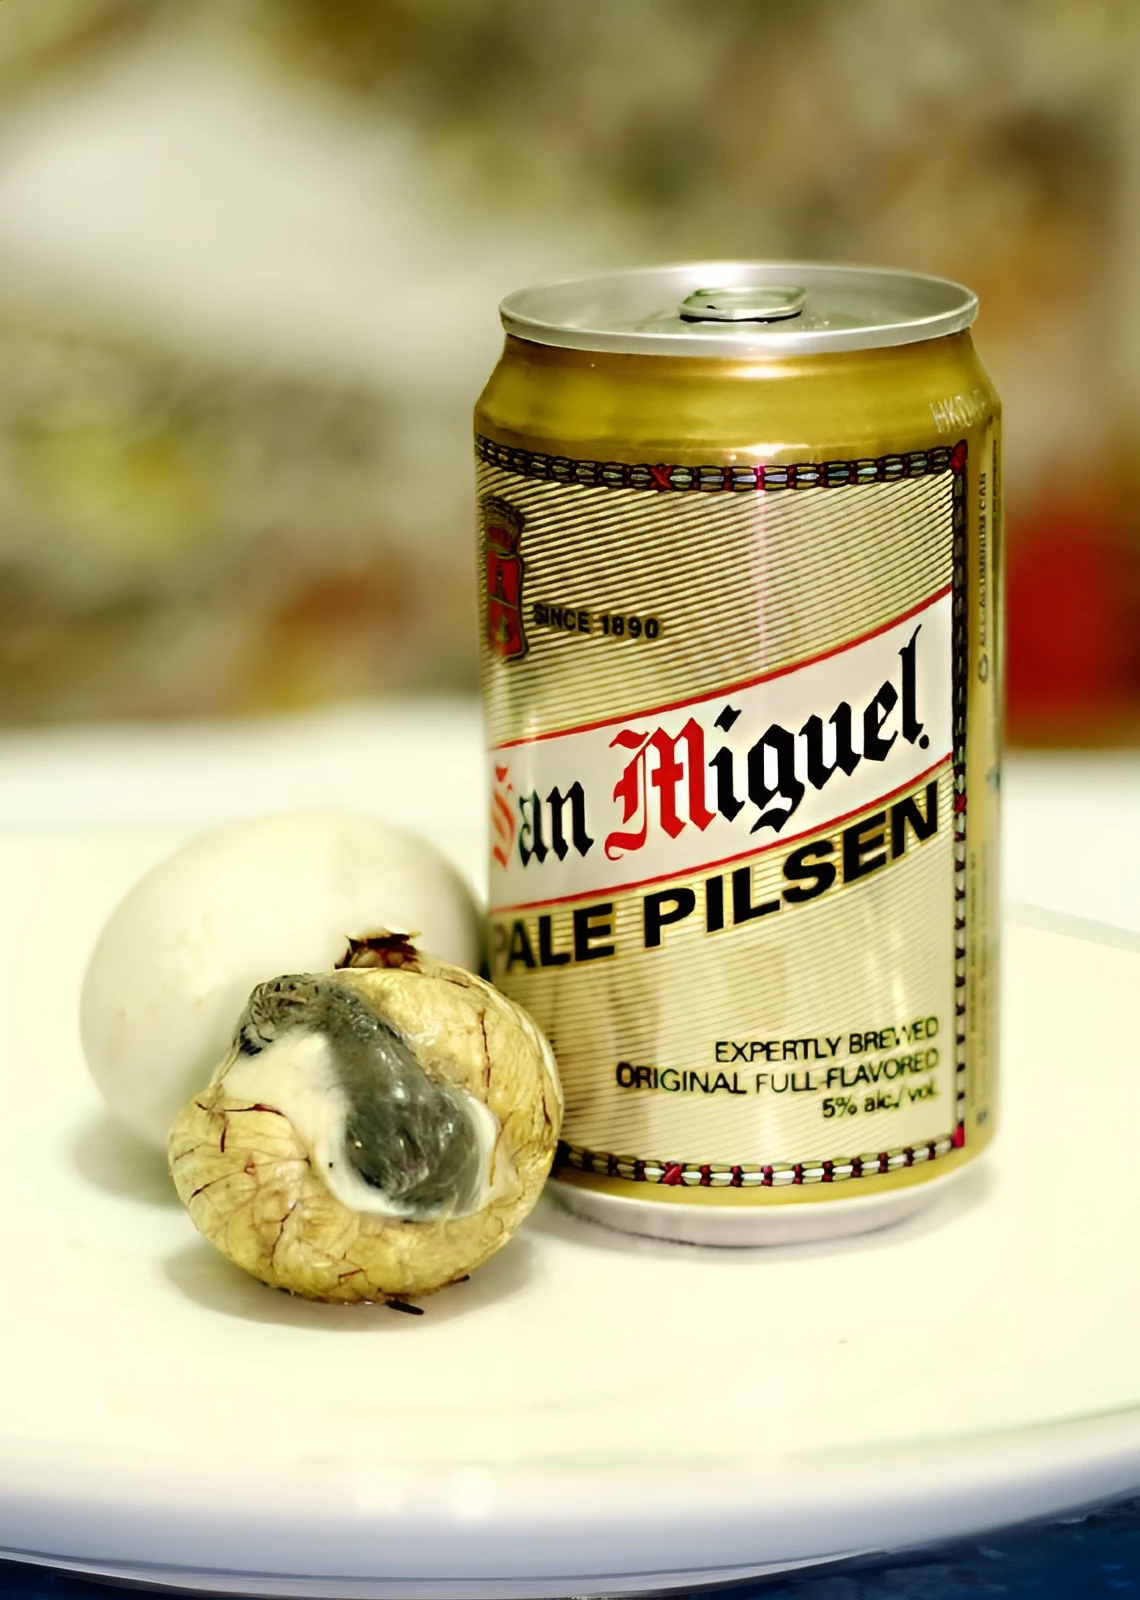 Good food combinations: Balut With Beer